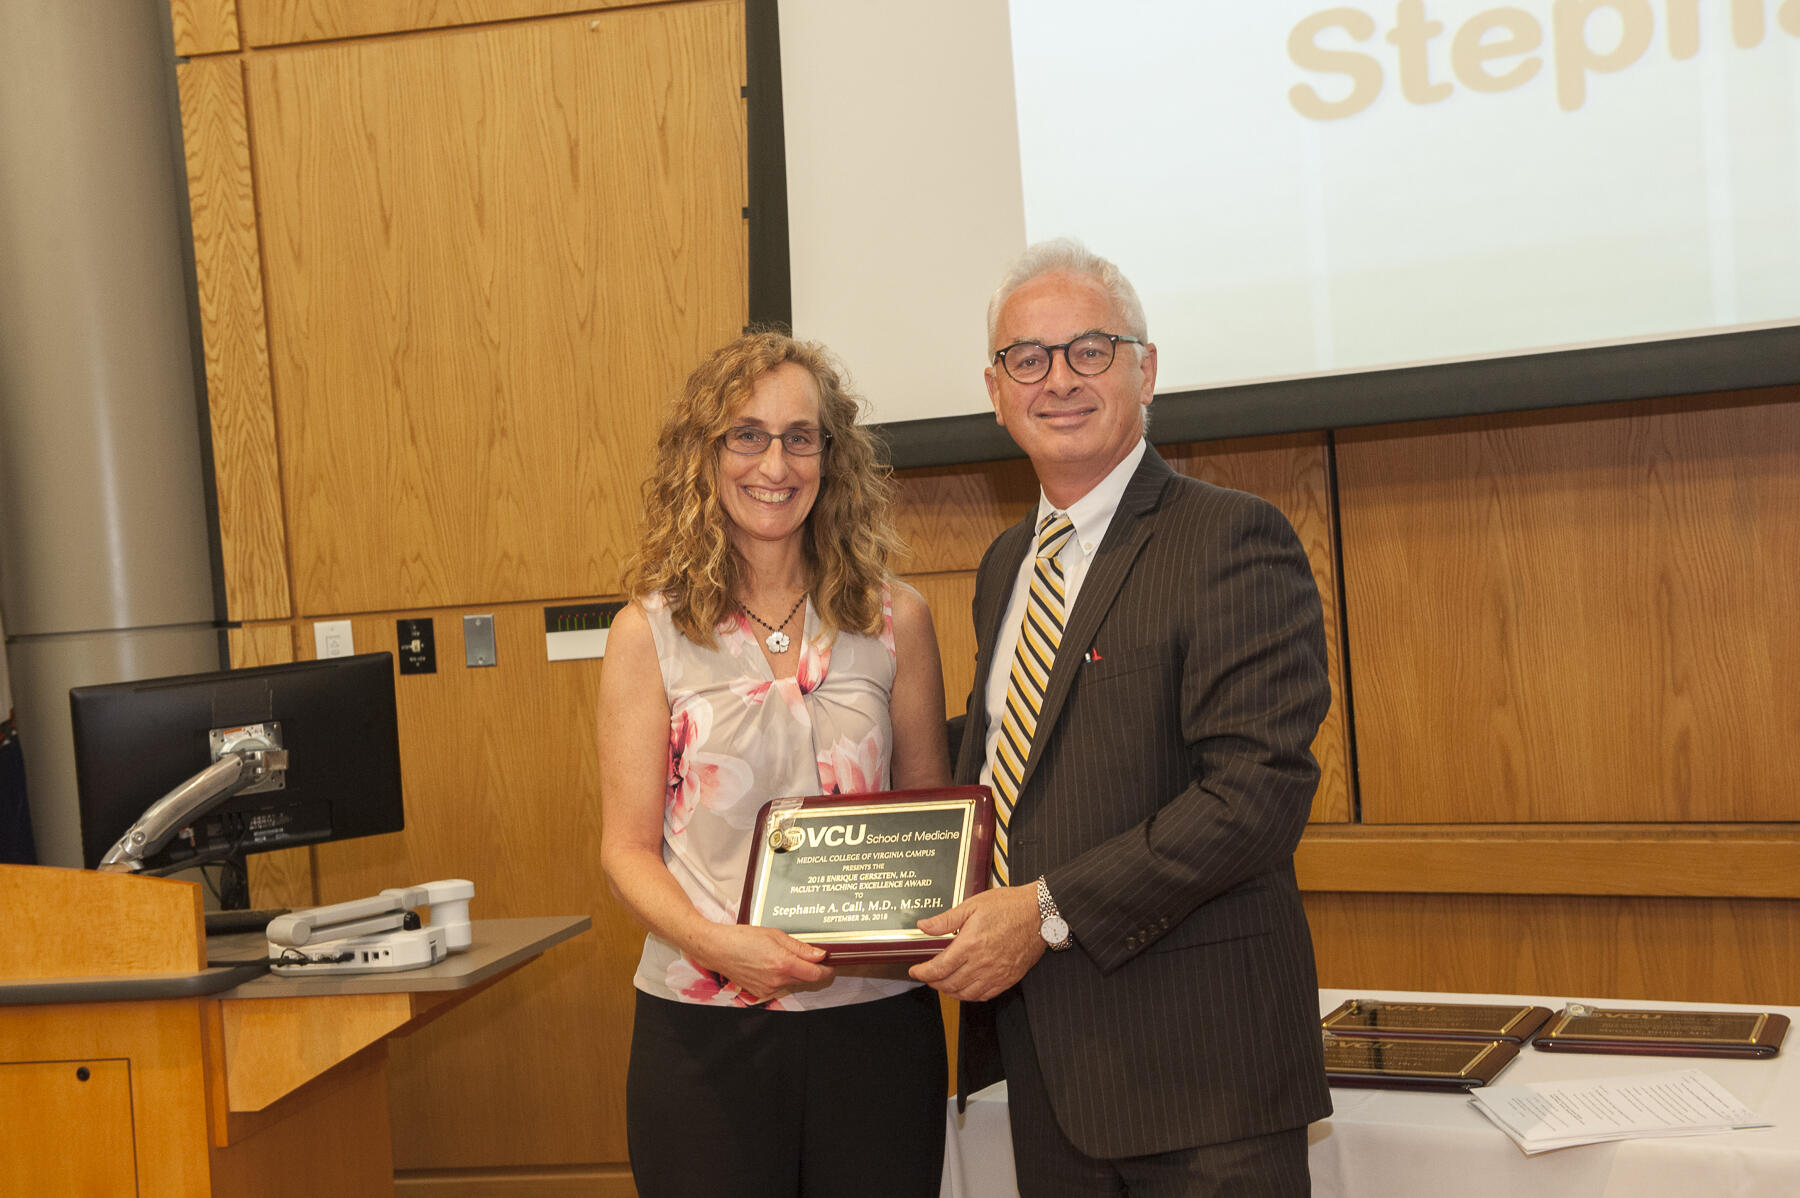 Stephanie Call, M.D., left, a professor in the Department of Internal Medicine in the School of Medicine, was one of two recipients of the Enrique Gerszten Faculty Teaching Excellence Award, the School of Medicine’s highest teaching award. (Photo by Tom Kojcsich, University Relations)